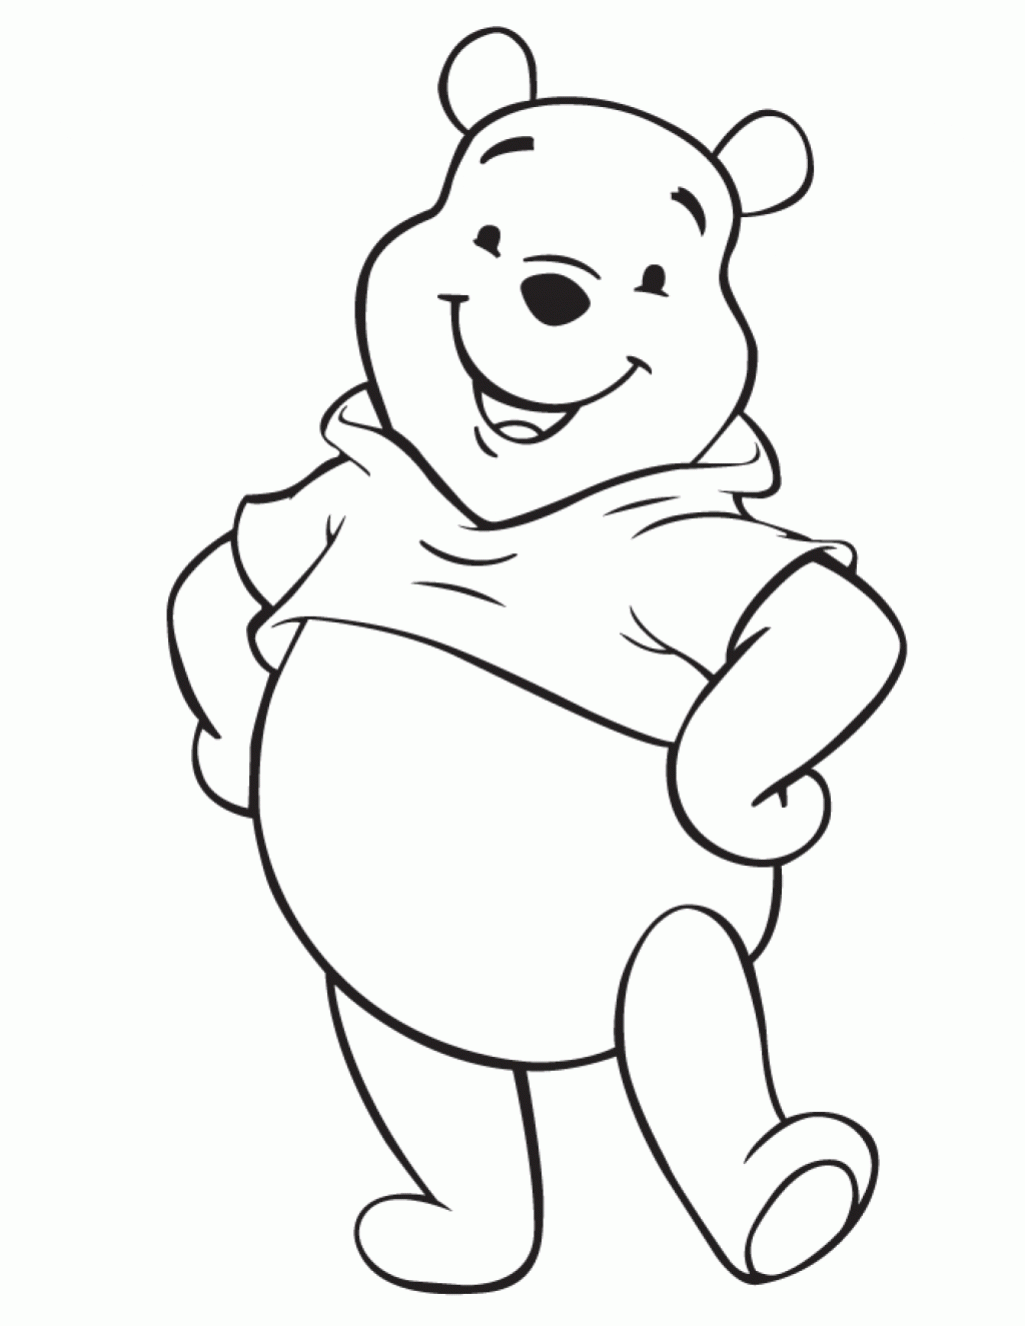 Free Cute Cartoon Characters Coloring Pages, Download Free Cute ...